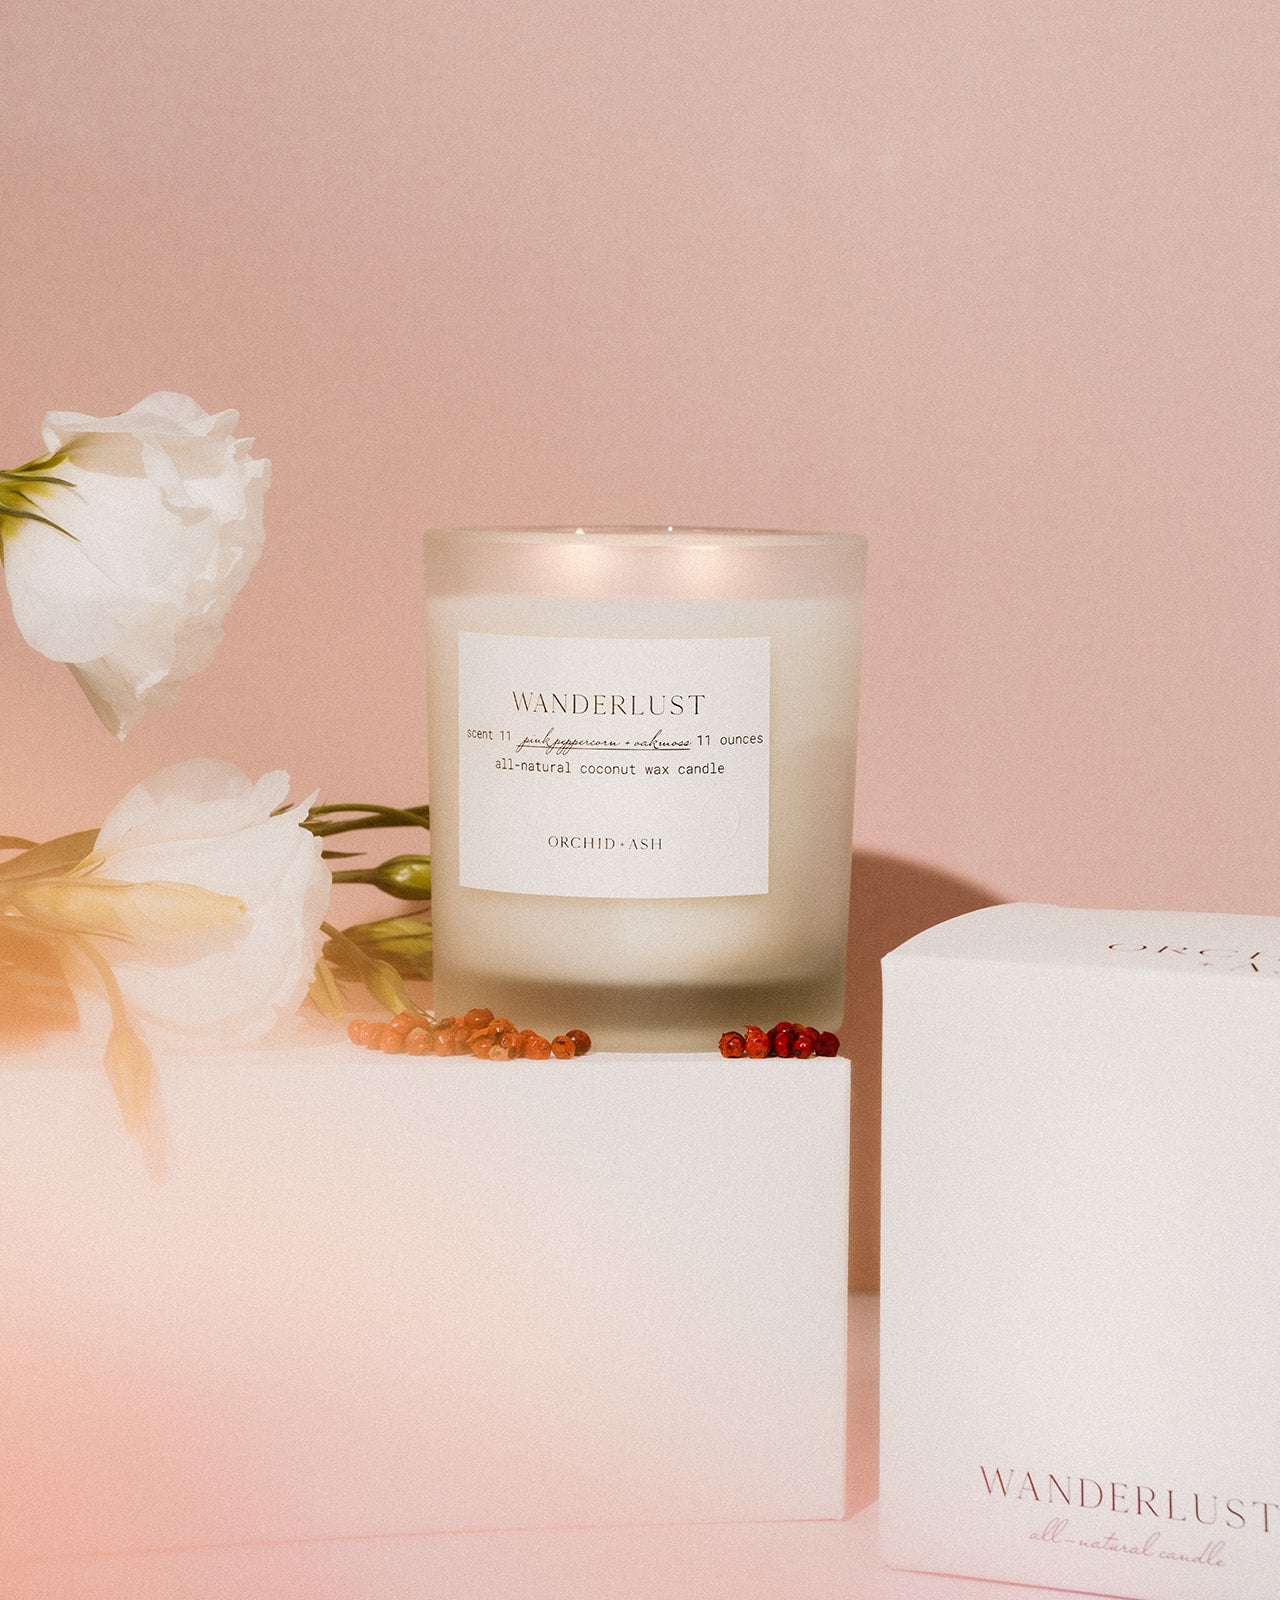 WANDERLUST Natural Candle by Orchid + Ash